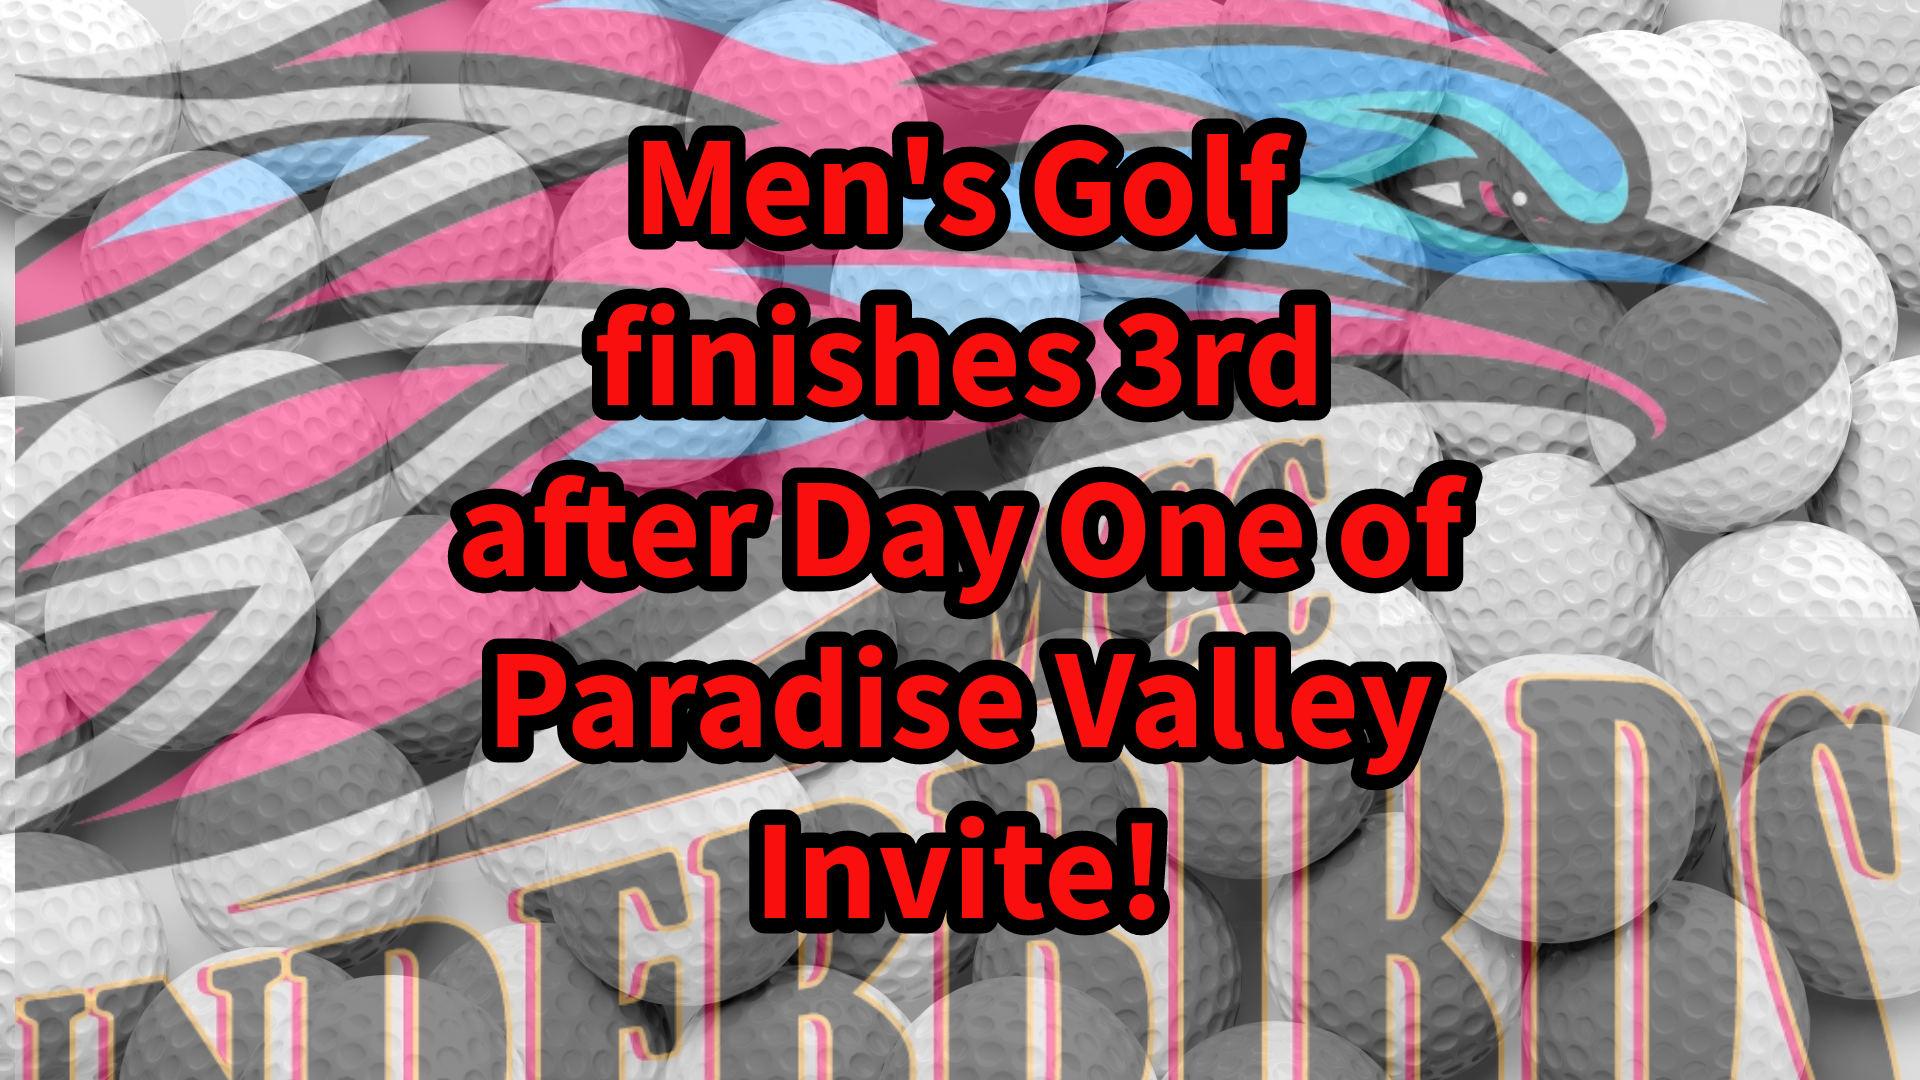 Men’s golf 3rd after round one at PV Invite